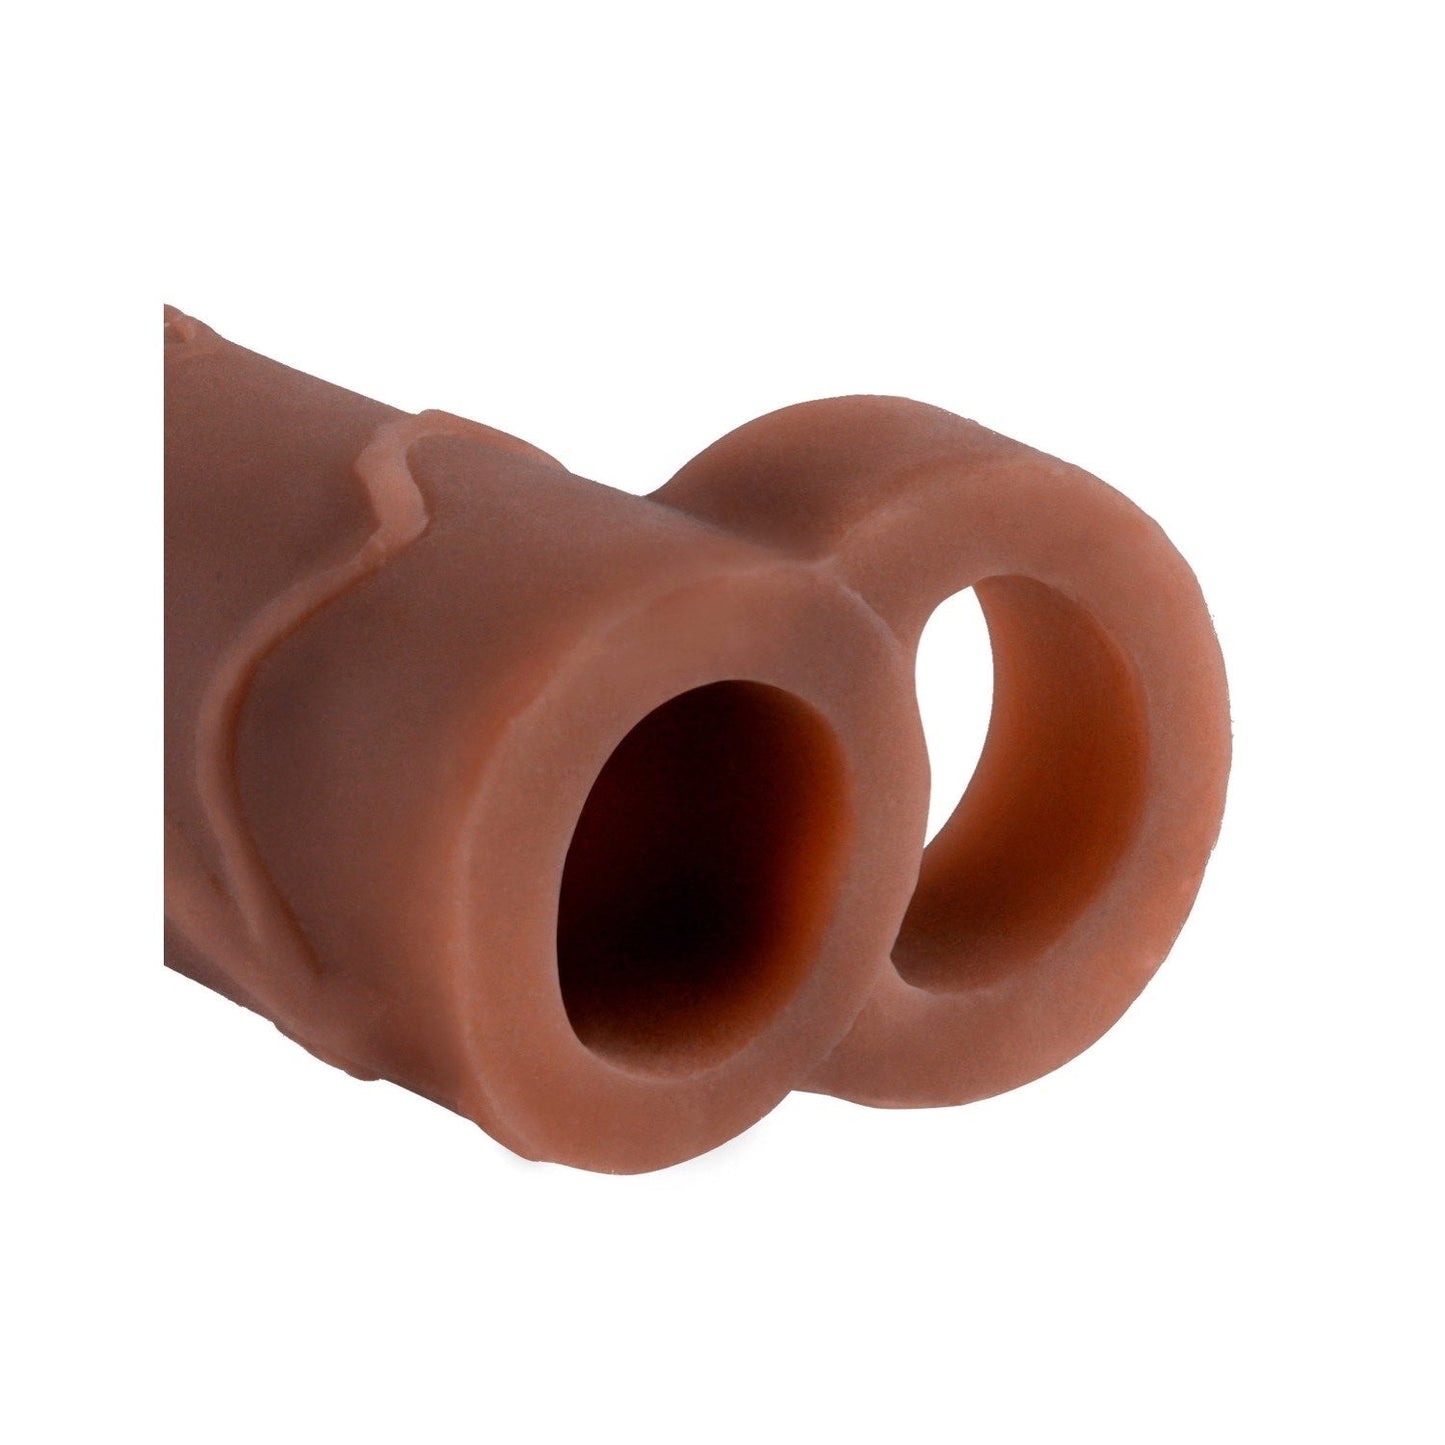 Perfect 2" Extension With Ball Strap - Brown Penis Extension Sleeve with Ball Strap